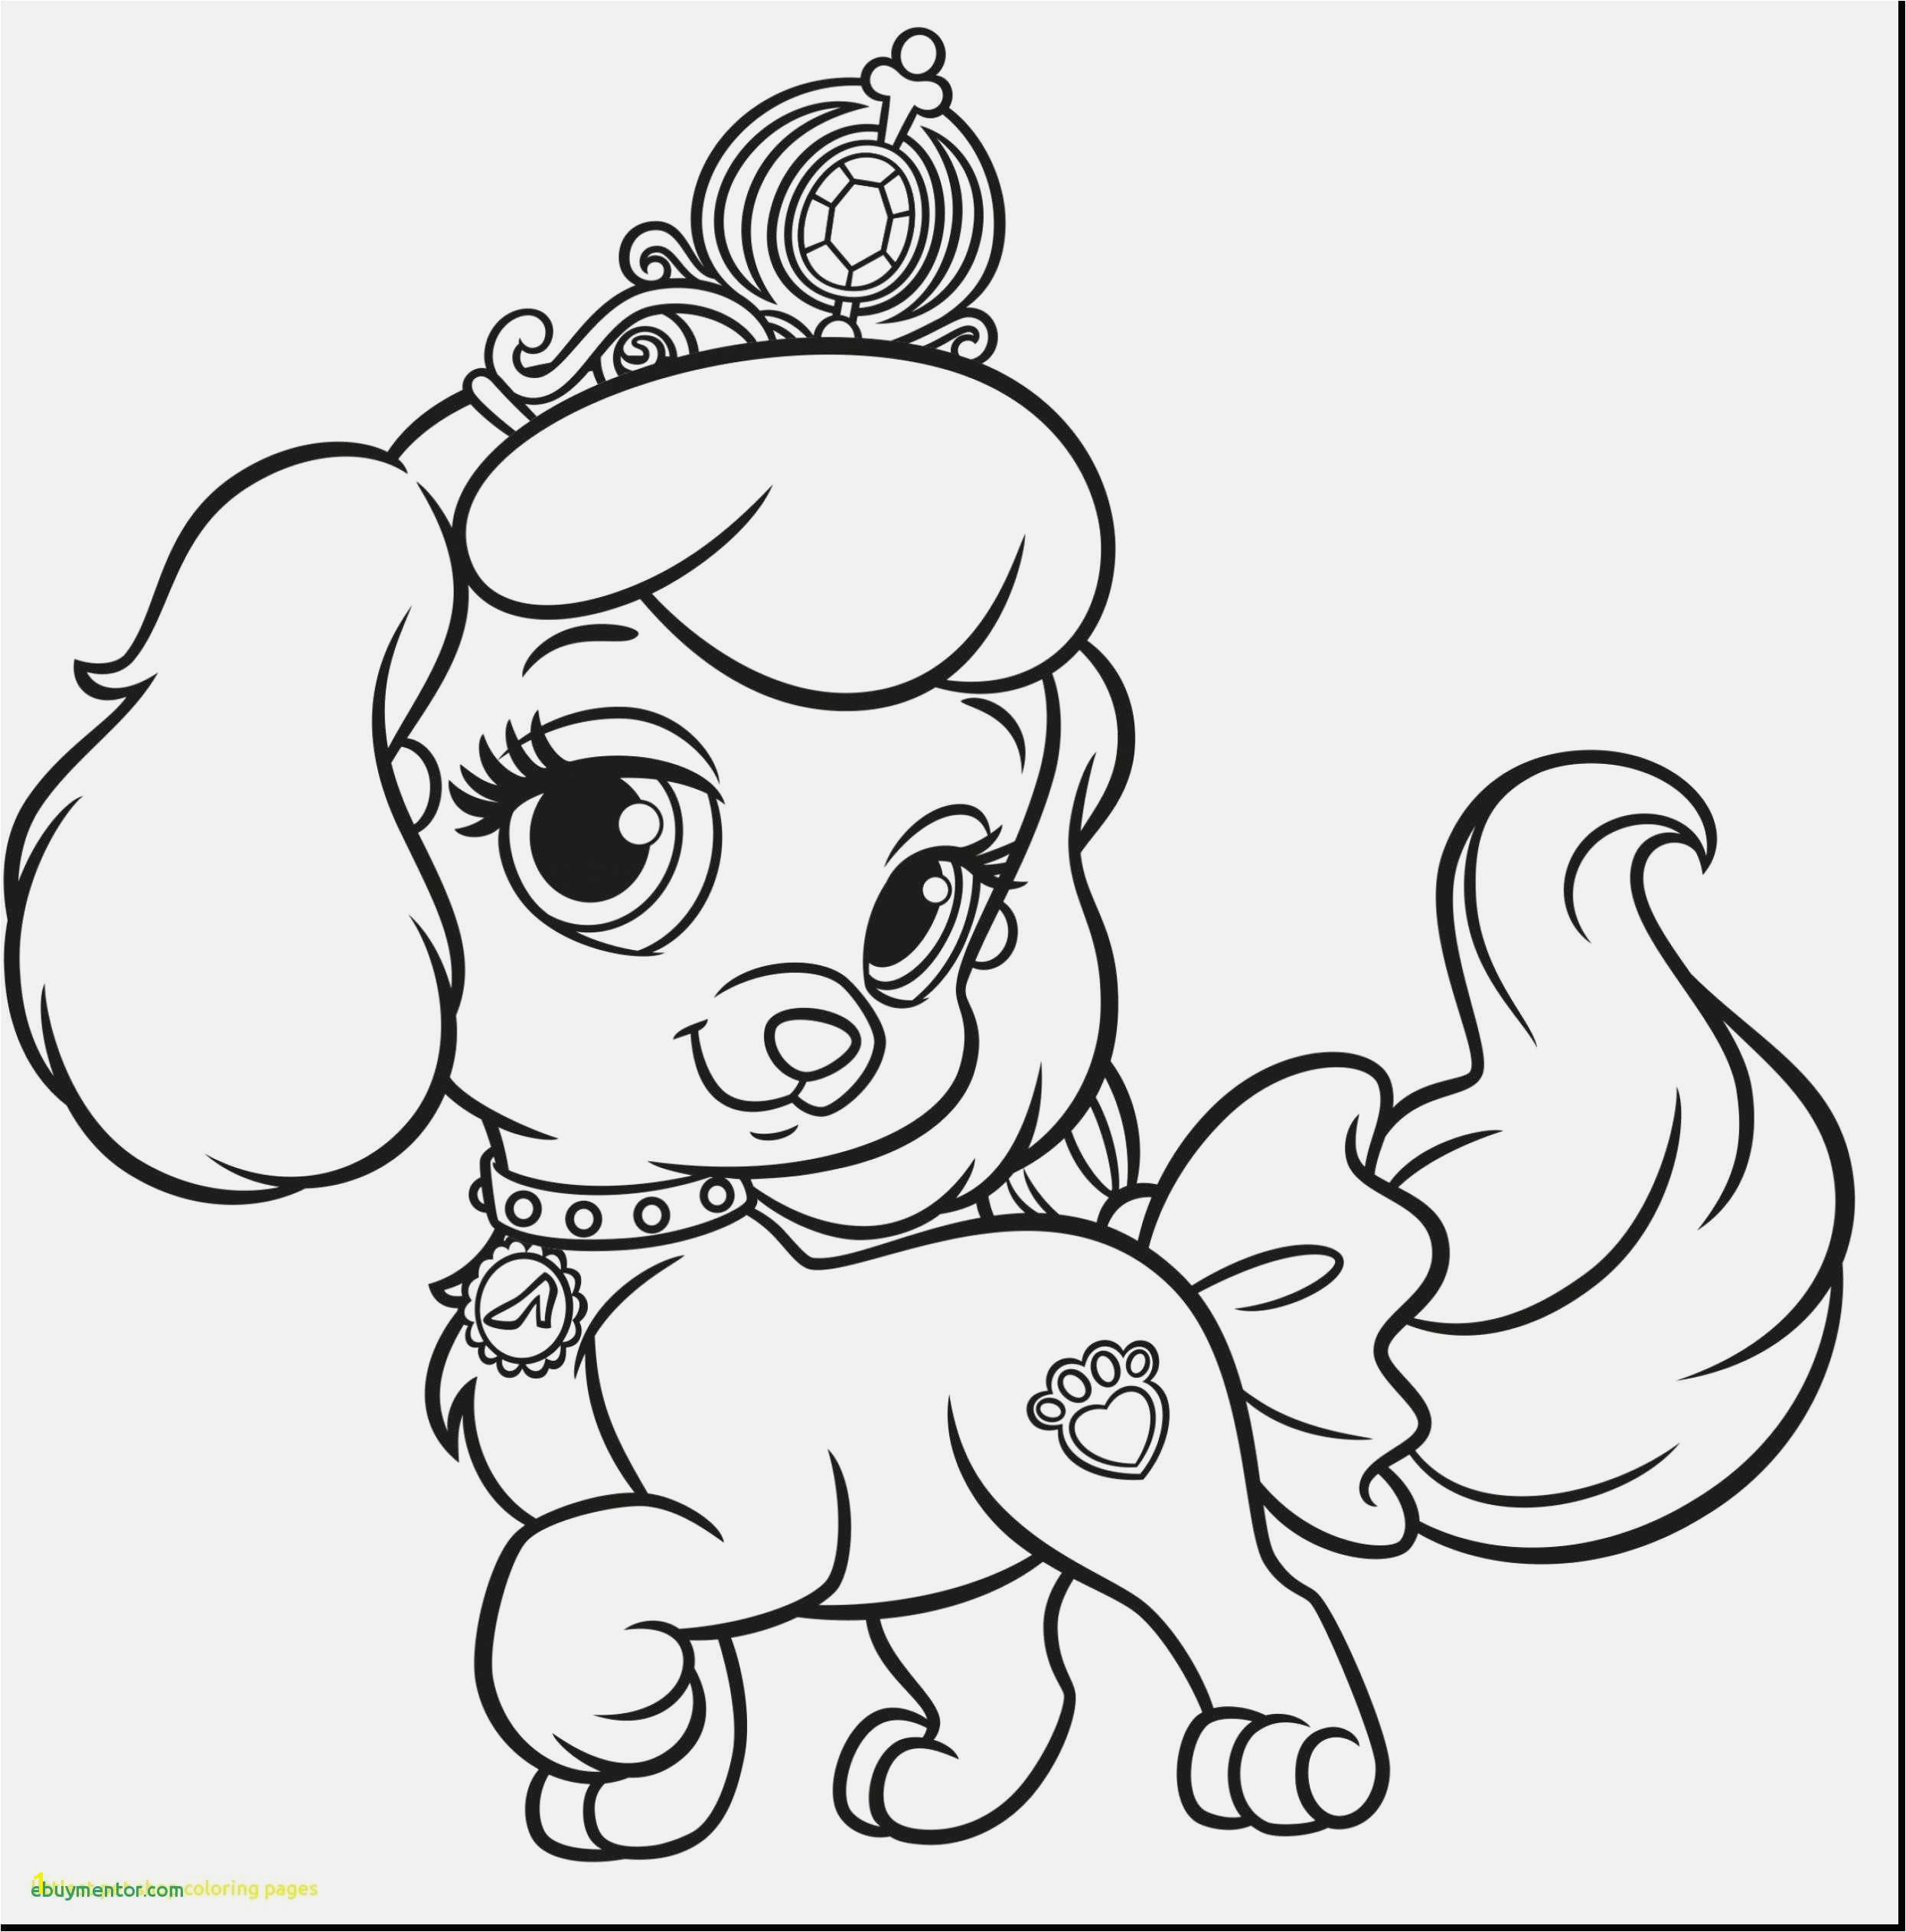 Coloring Pages Printing Pretty Coloring Pages Download and Print for Free Beautiful Littlest Pet Shop